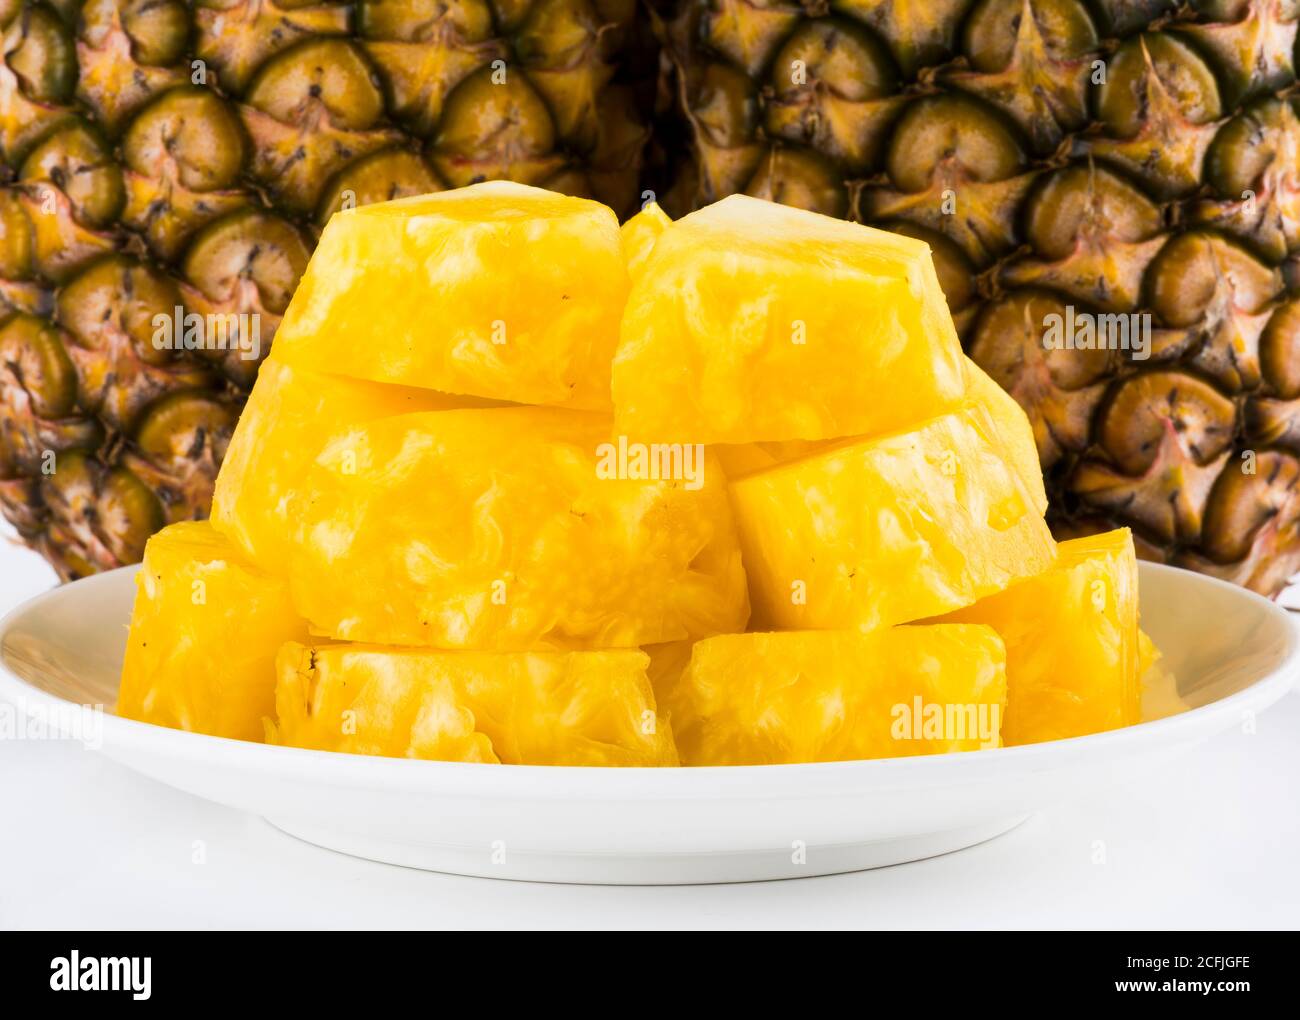 Sliced of pineapple on white background Stock Photo